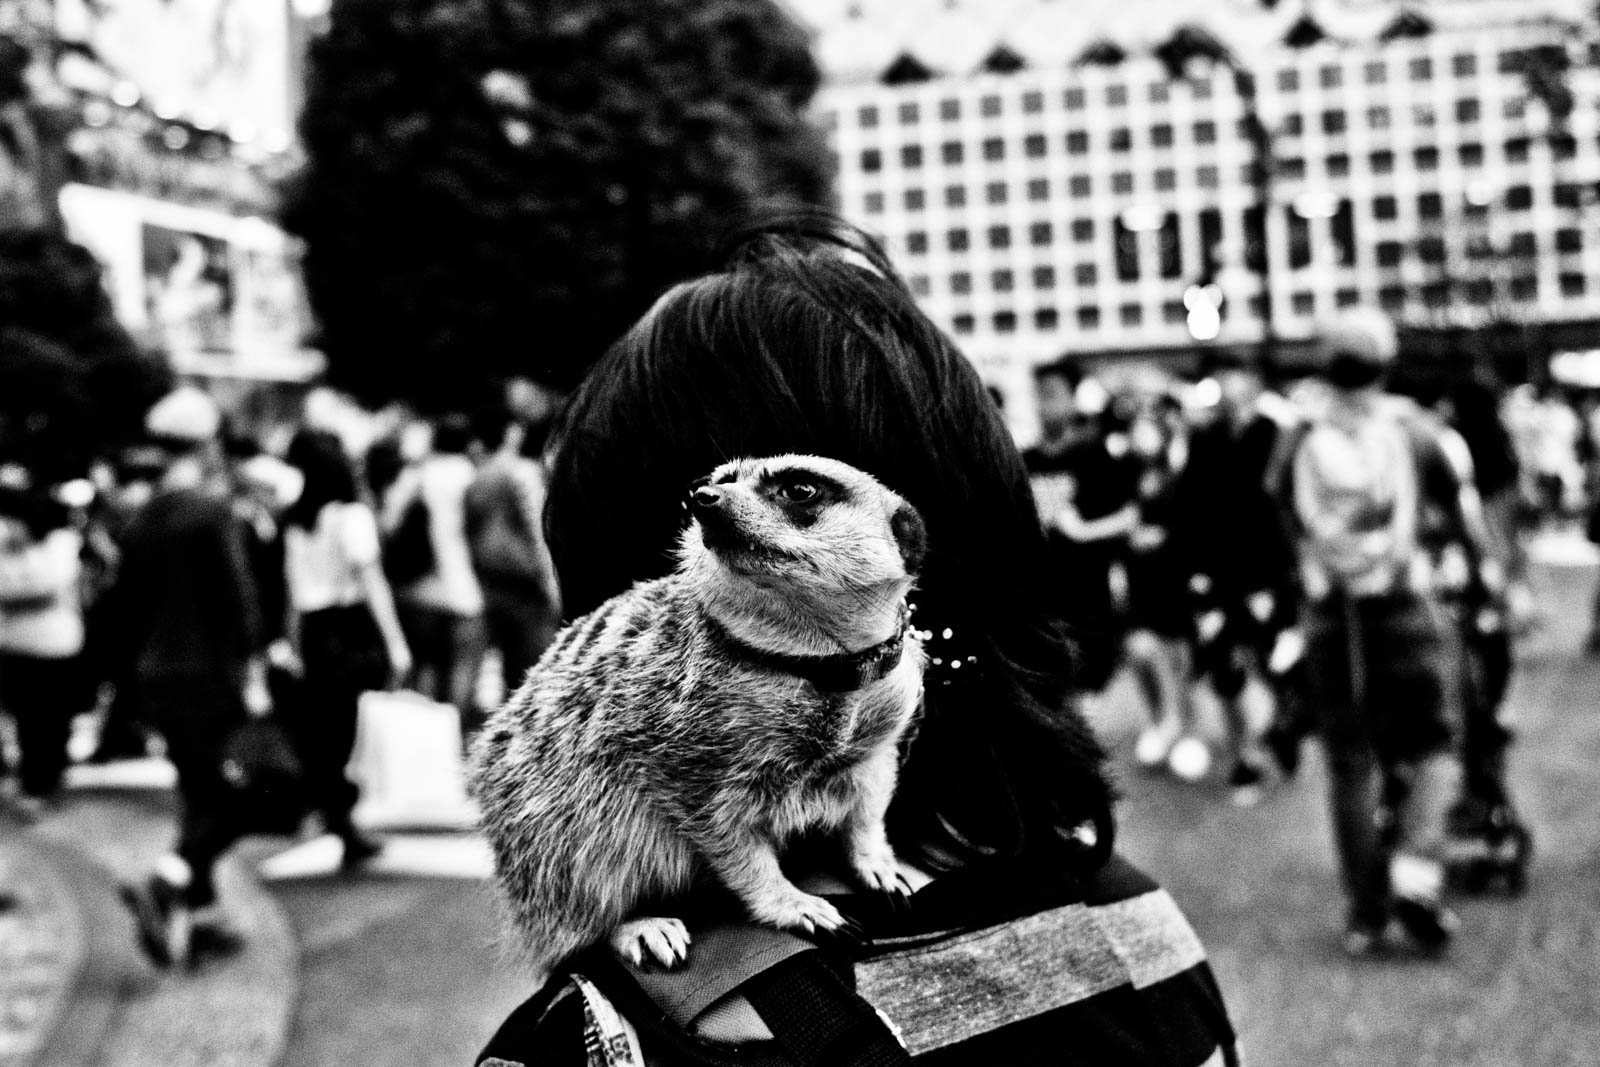 Meercat on a shoulder of Japanese man on Shibuya, Tokyo. Street photography by Victor Borst